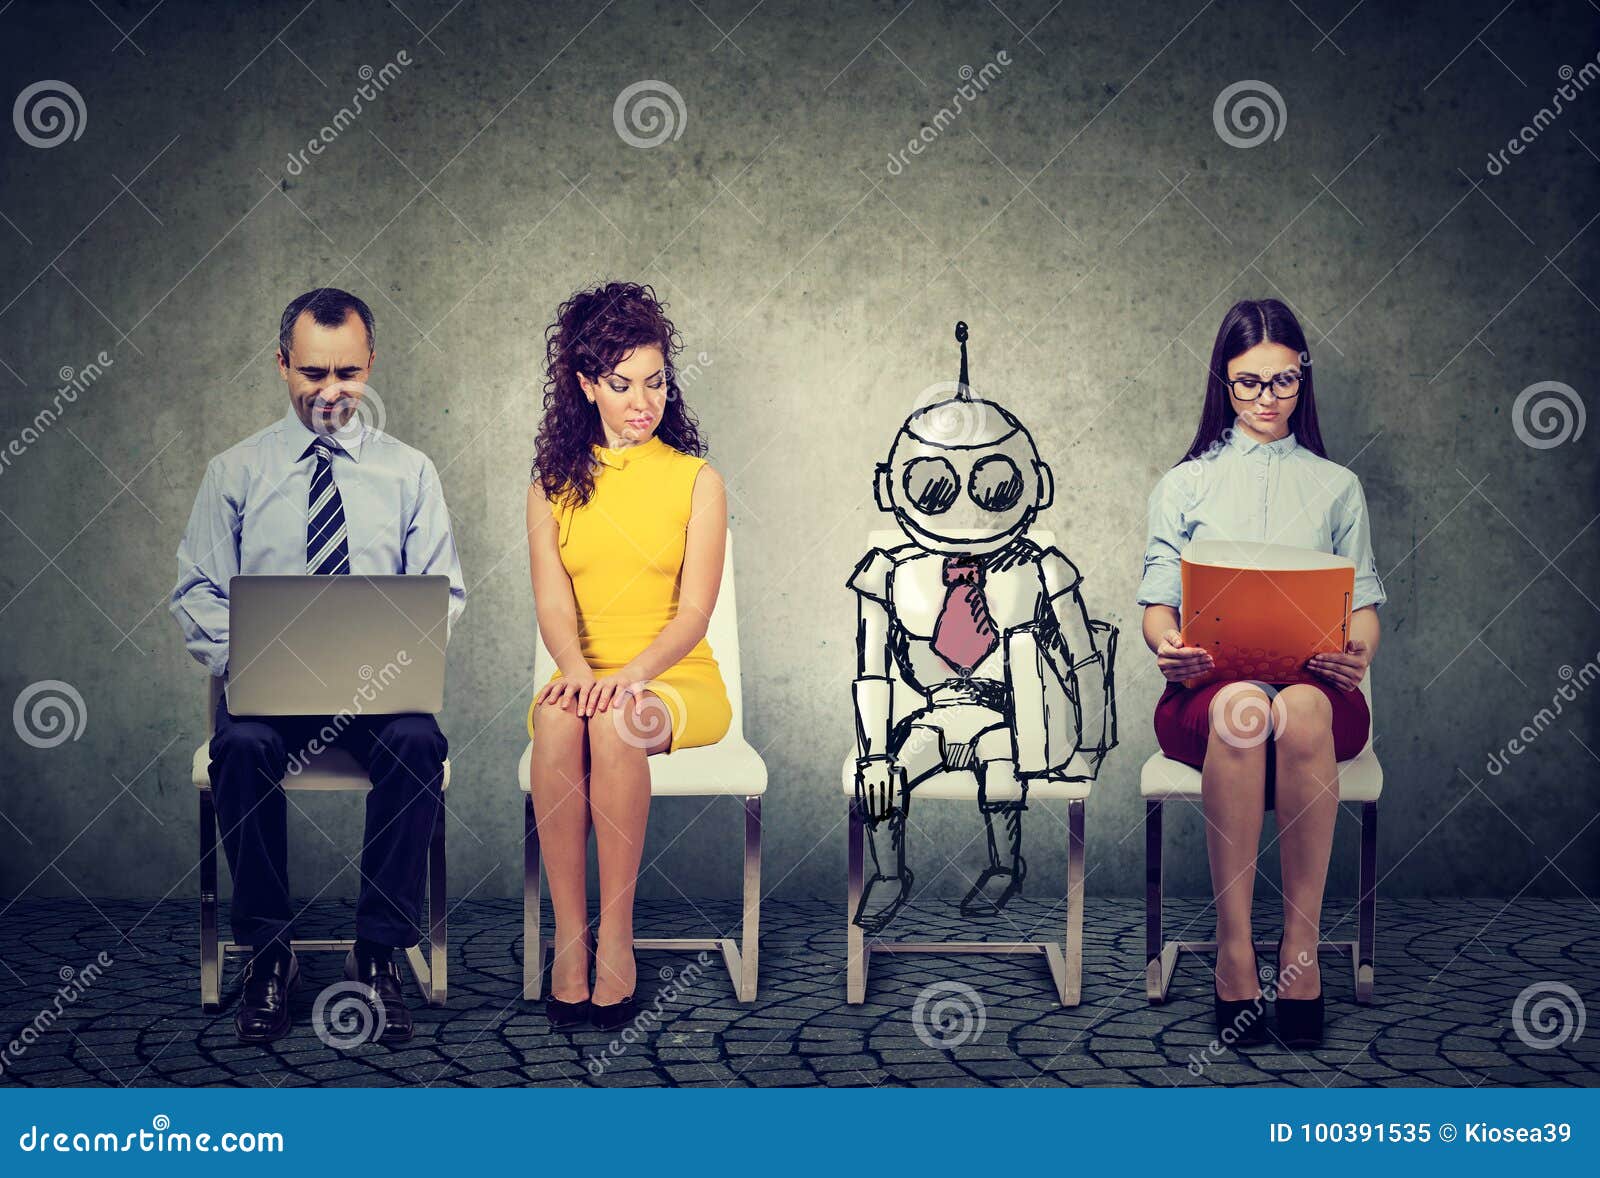 cartoon robot sitting in line with human applicants for a job interview